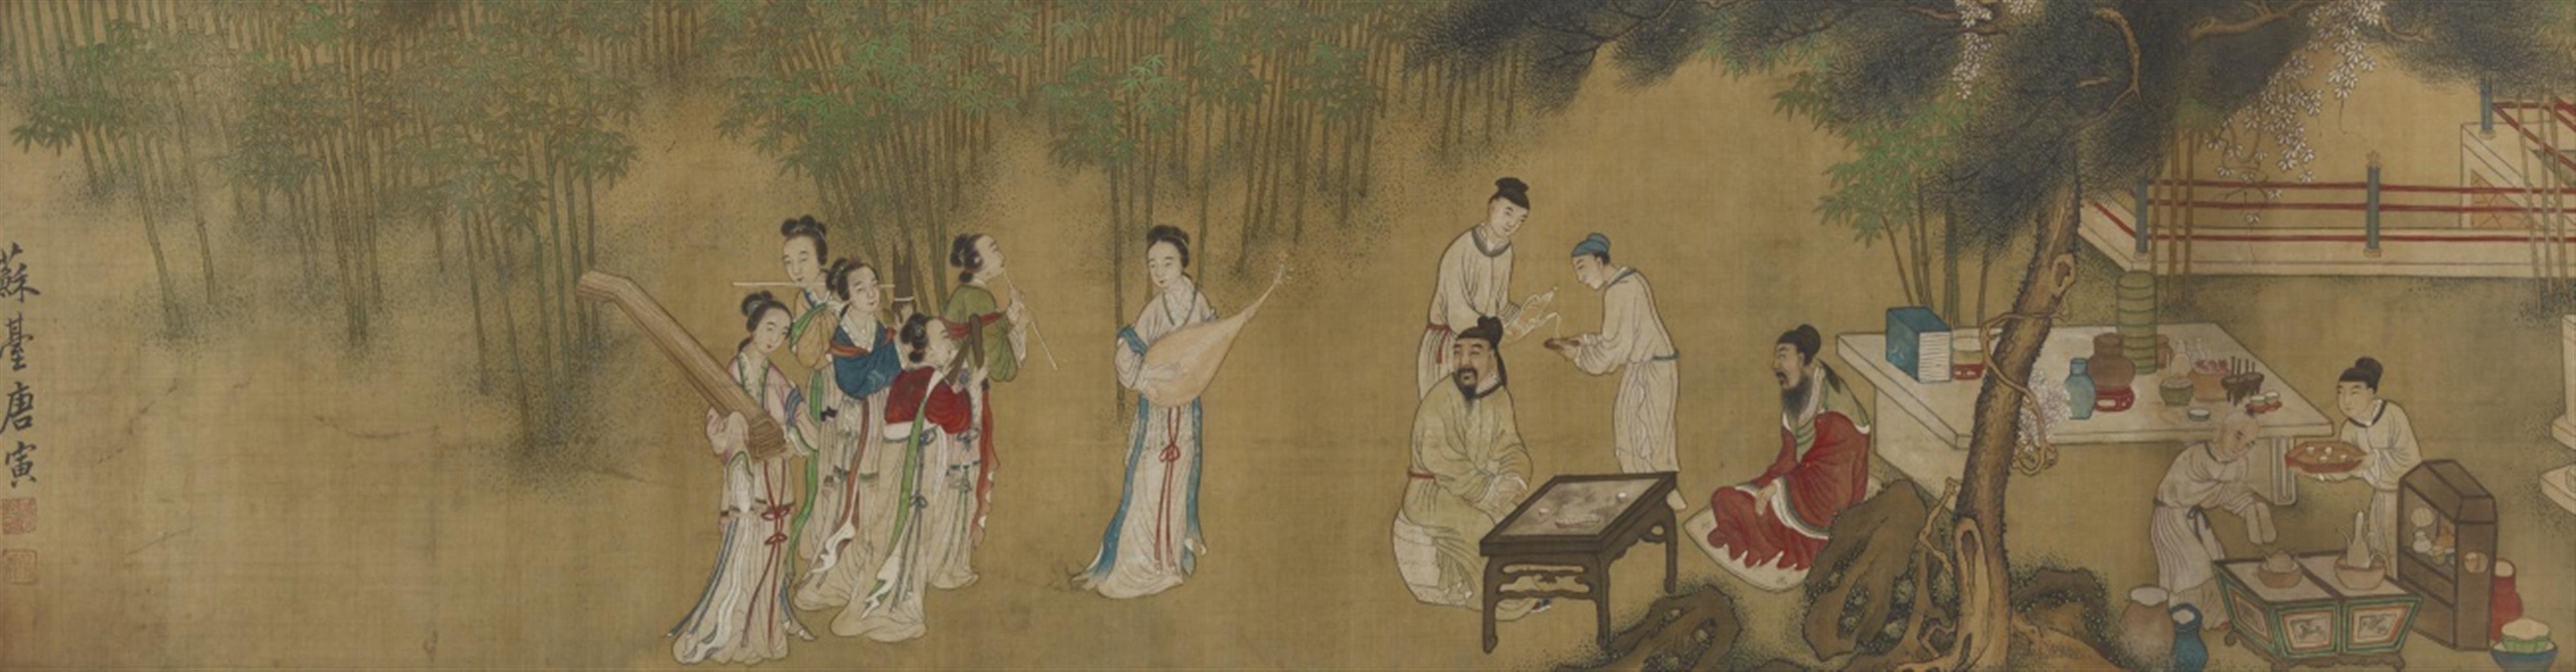 Tang Yin . Qing dynasty - The our arts of the Chinese scholar ((the guqin, the strategy game qi, calligraphy, painting. Inscribed Su Tai Tang Yin and sealed Tang Yin zhi yin and Bohu. Formerly mounted as... - image-2